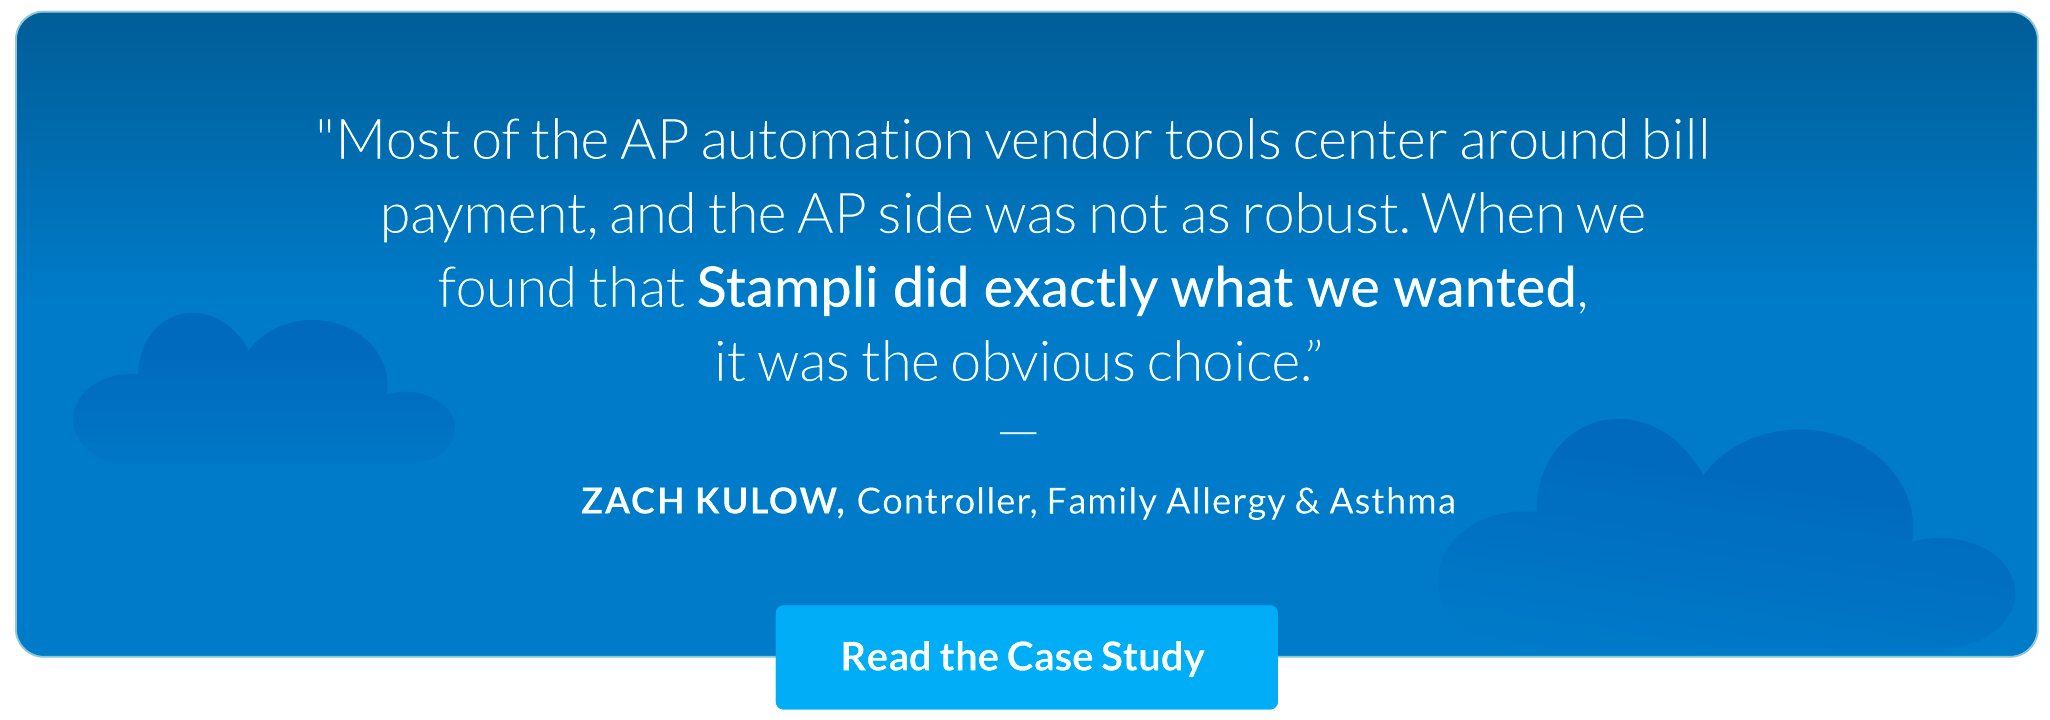 Stampli_Family Allergy & Asthma Case Study_Banner